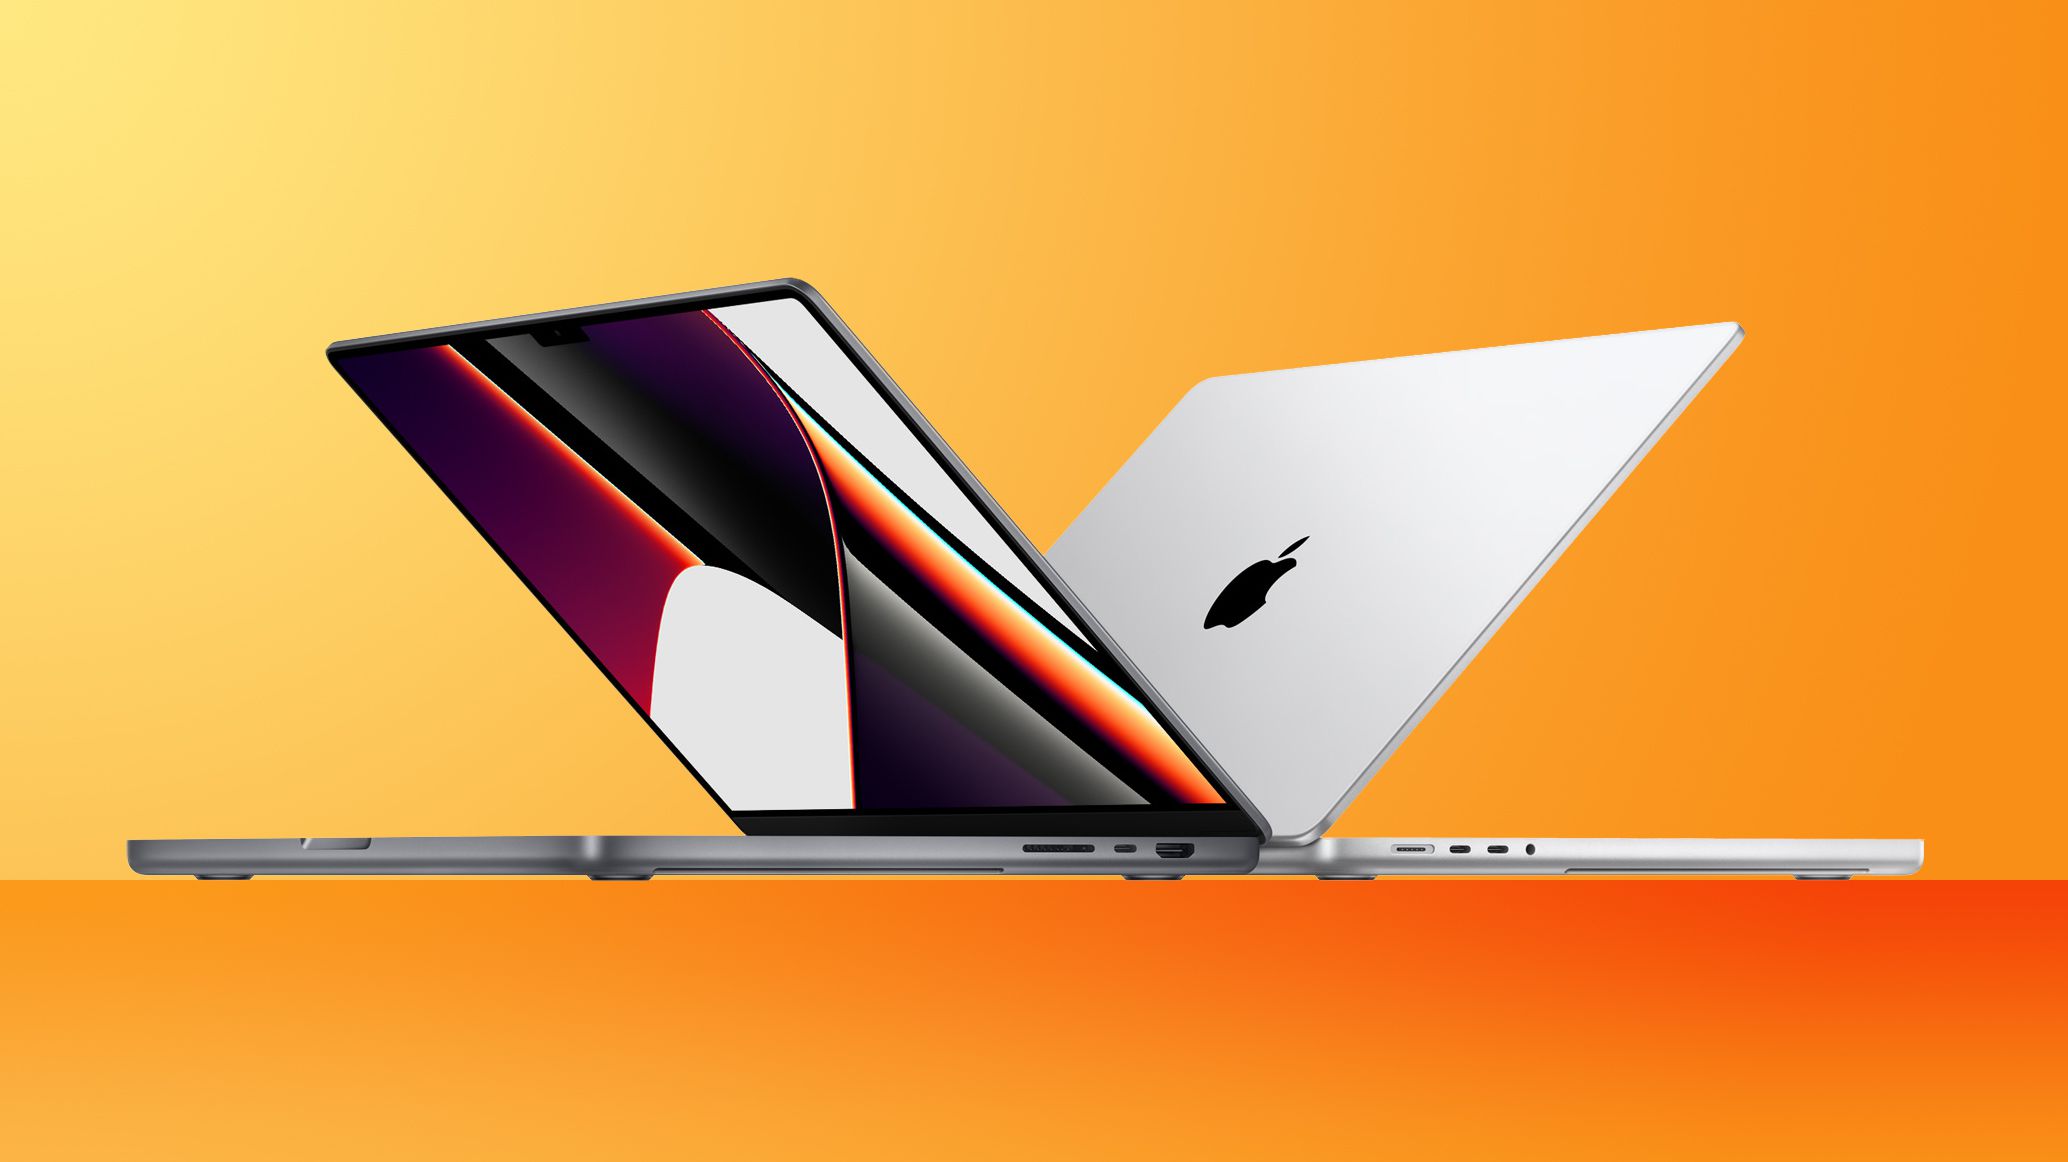 It's been over 200 days since Apple debuted its redesigned MacBook Pro lineup. Offered in 14-inch and 16-inch display sizes, the new-look MacBooks wow